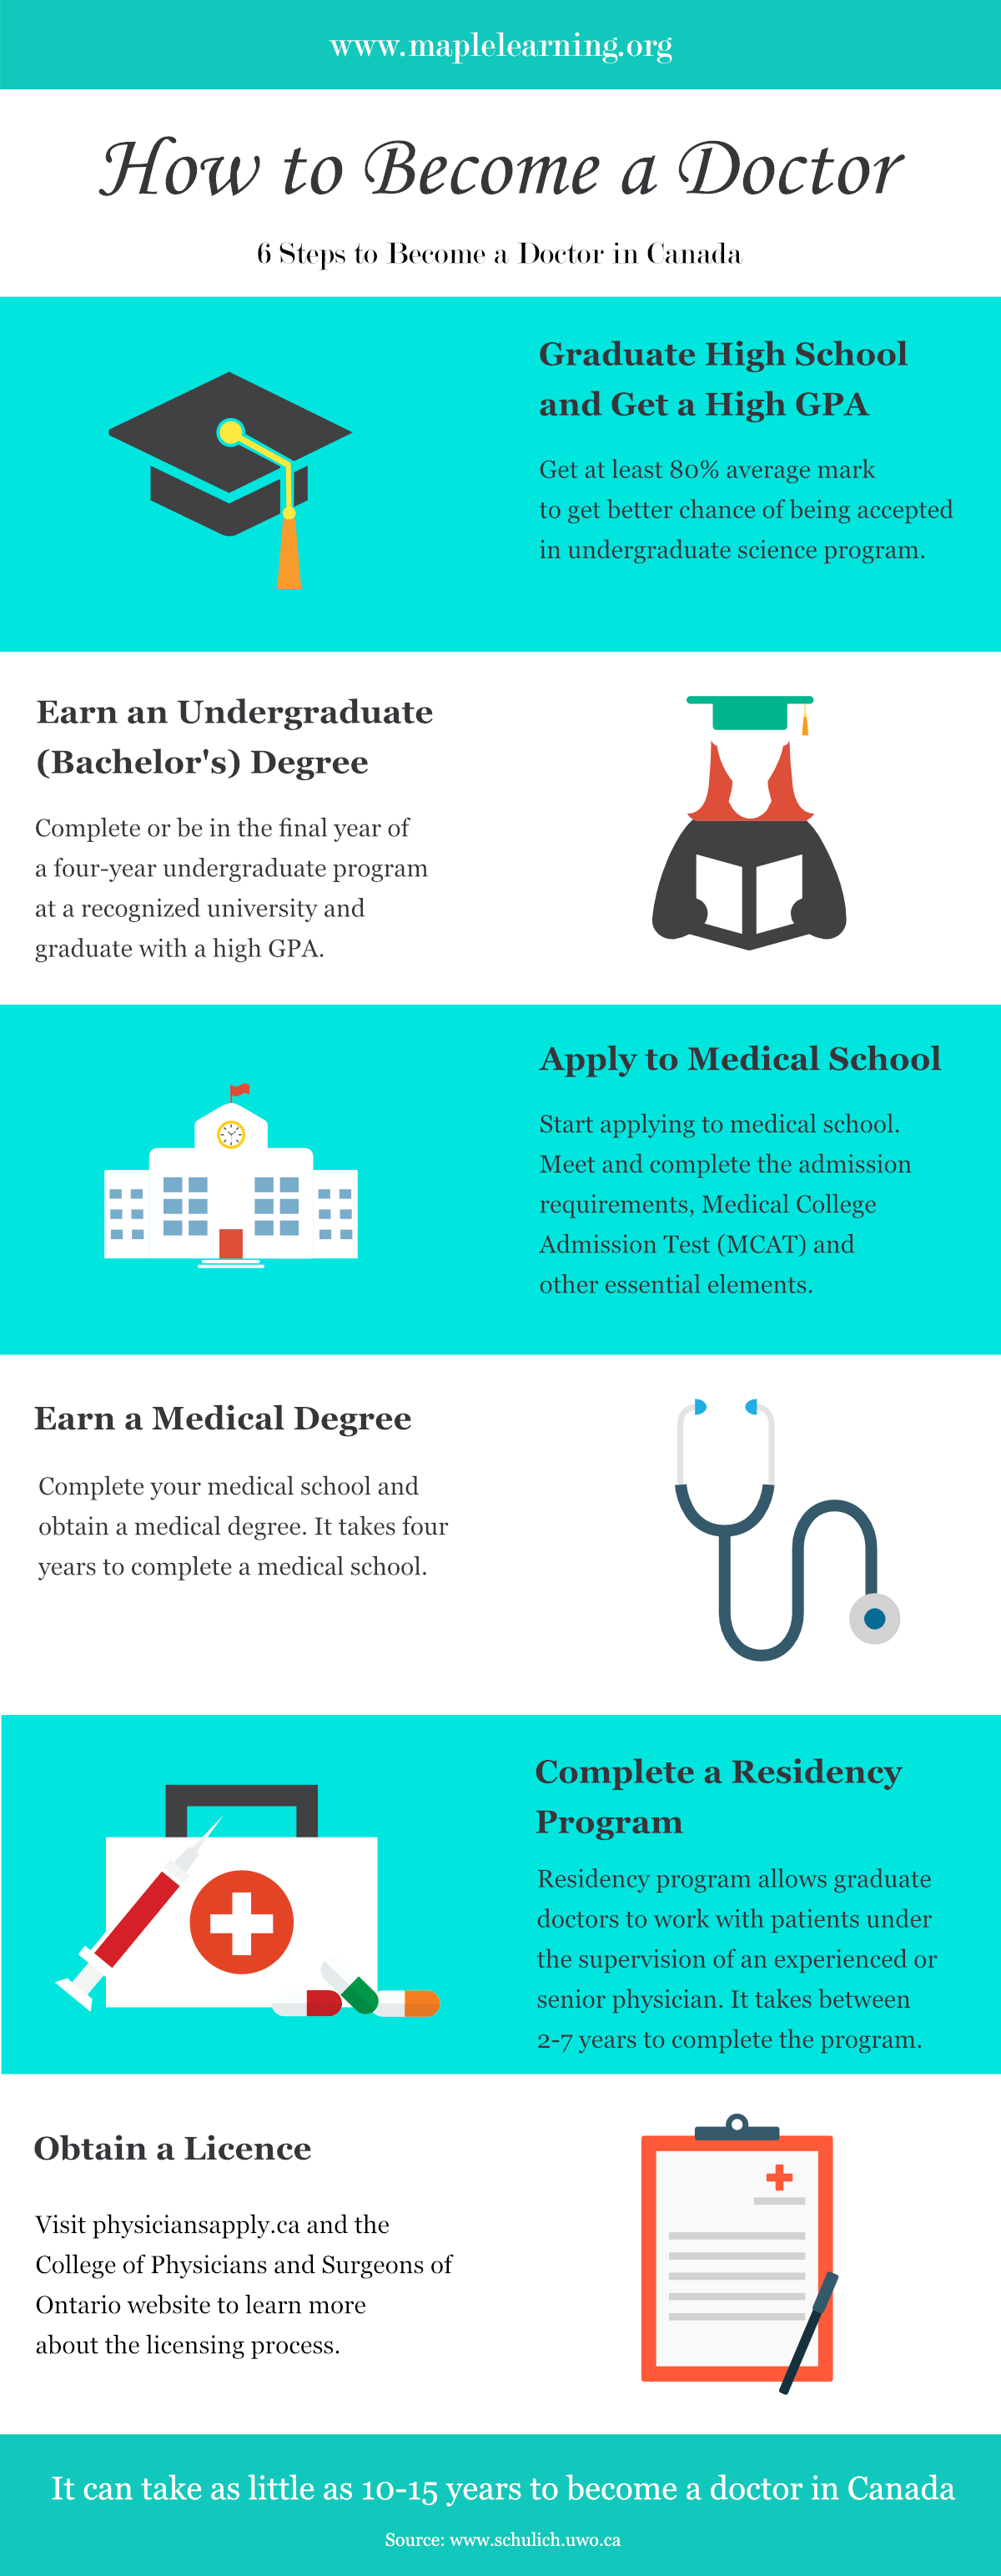 How to become a doctor in Canada